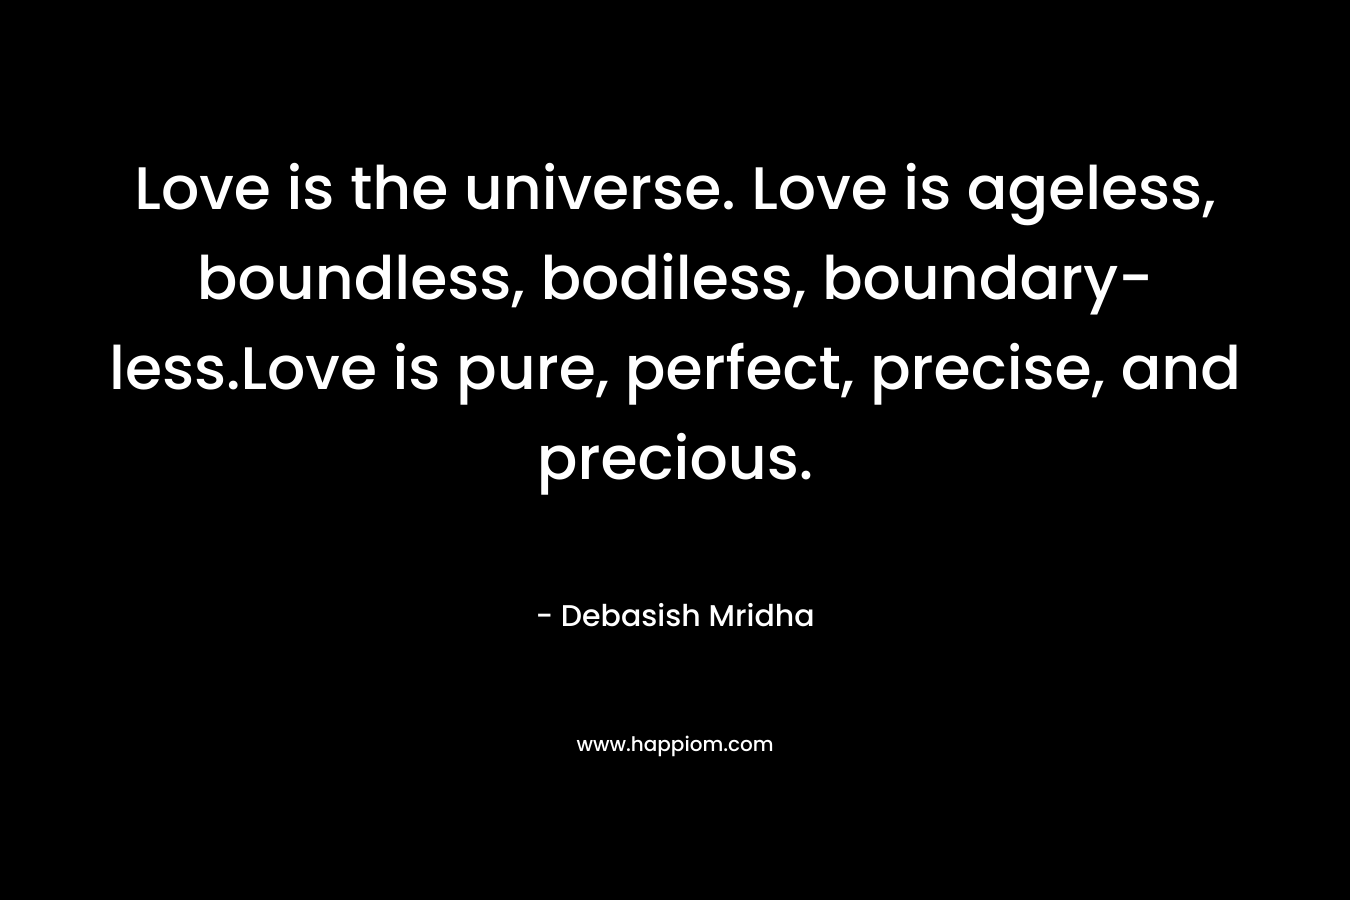 Love is the universe. Love is ageless, boundless, bodiless, boundary-less.Love is pure, perfect, precise, and precious.